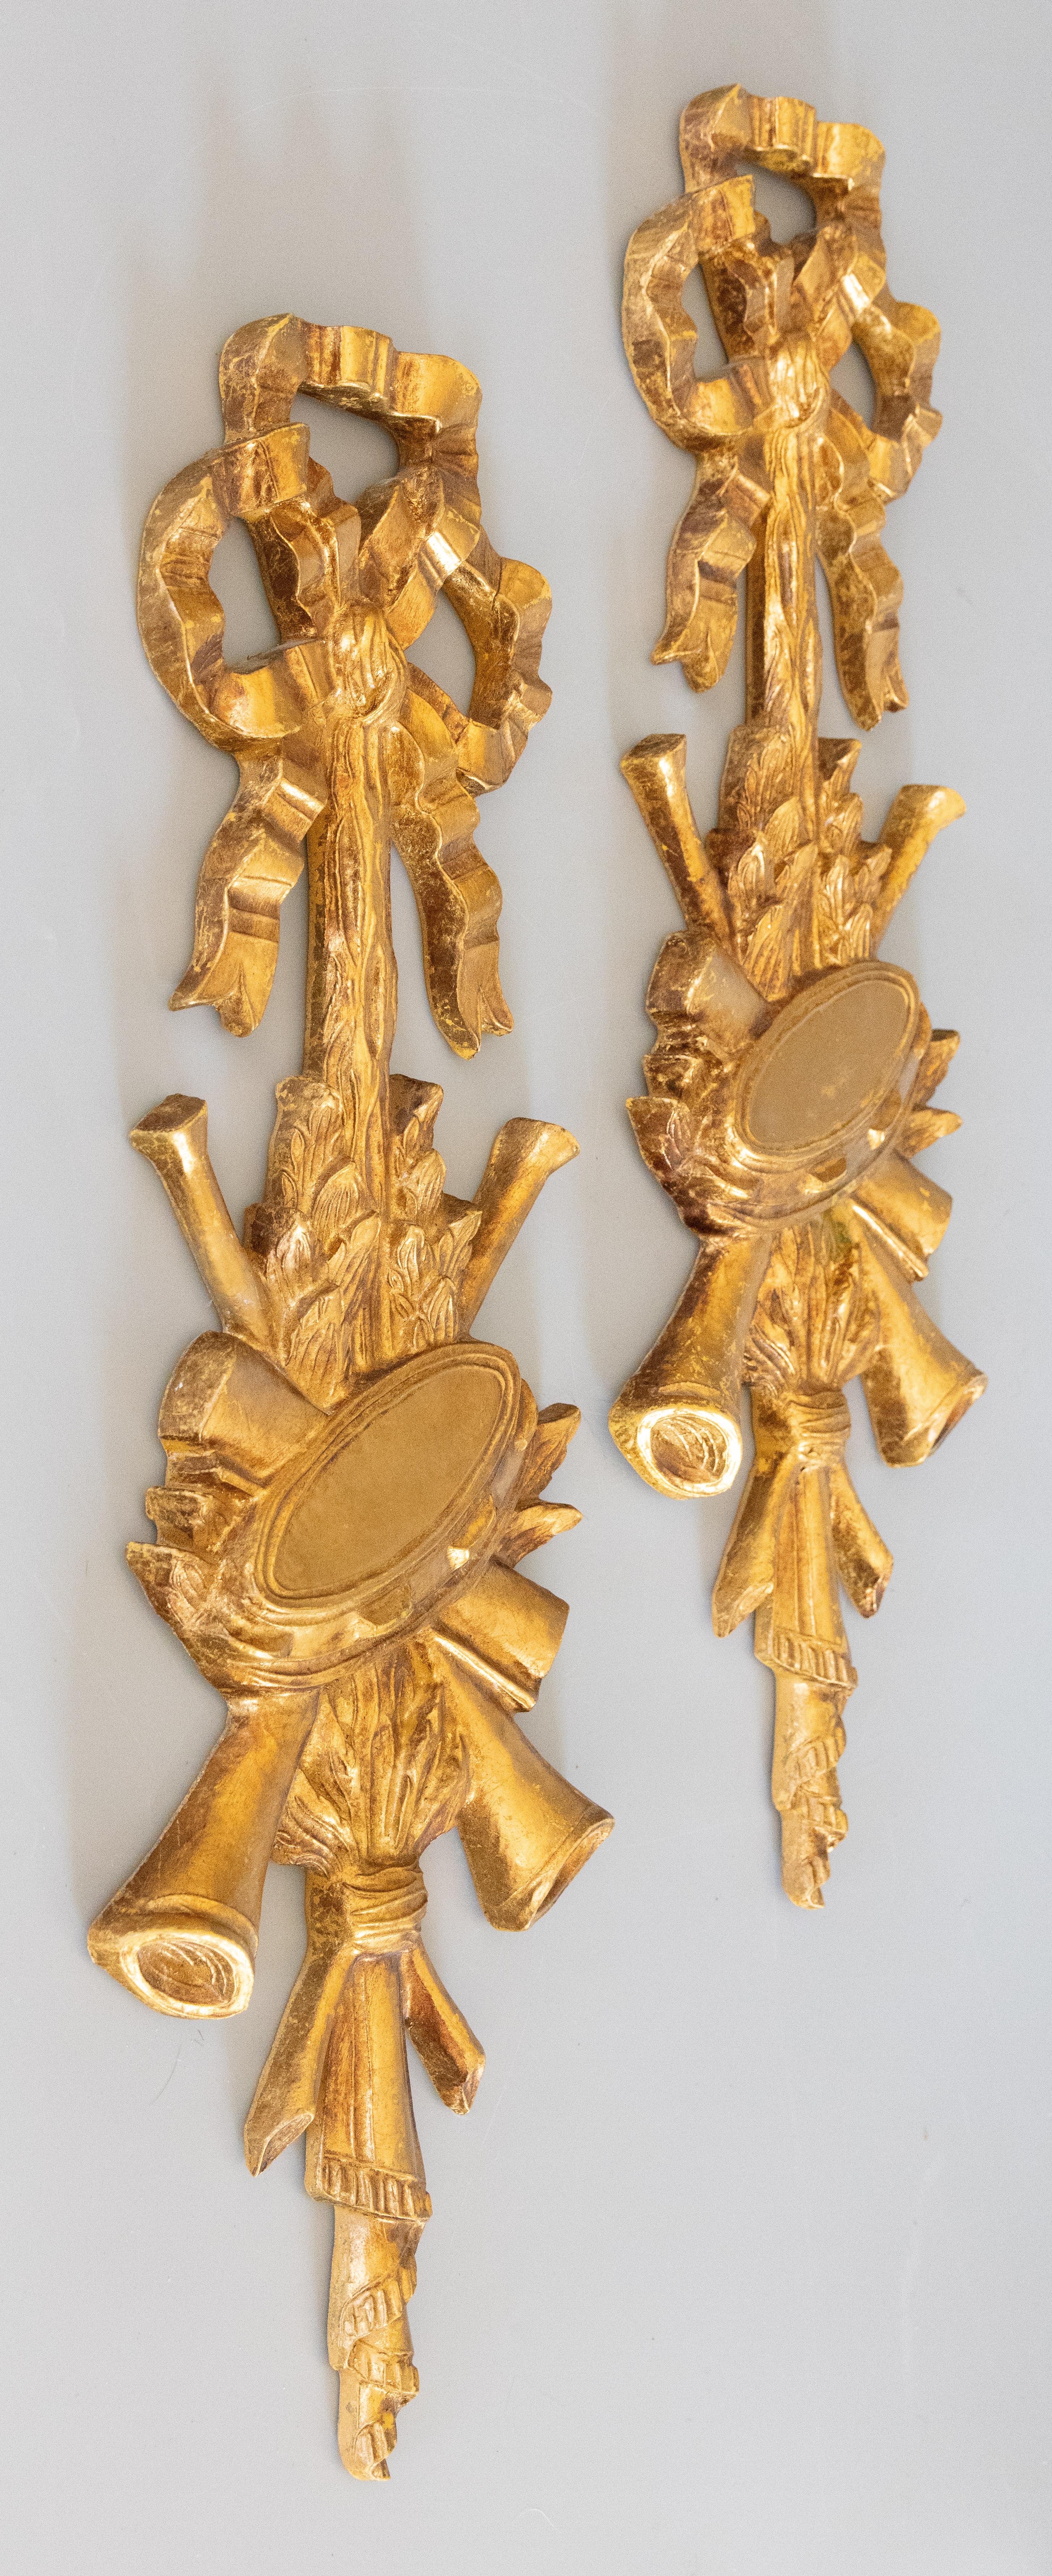 Neoclassical Pair of Italian Carved Giltwood Musical Instruments Wall Hangings Swags, c. 1950 For Sale